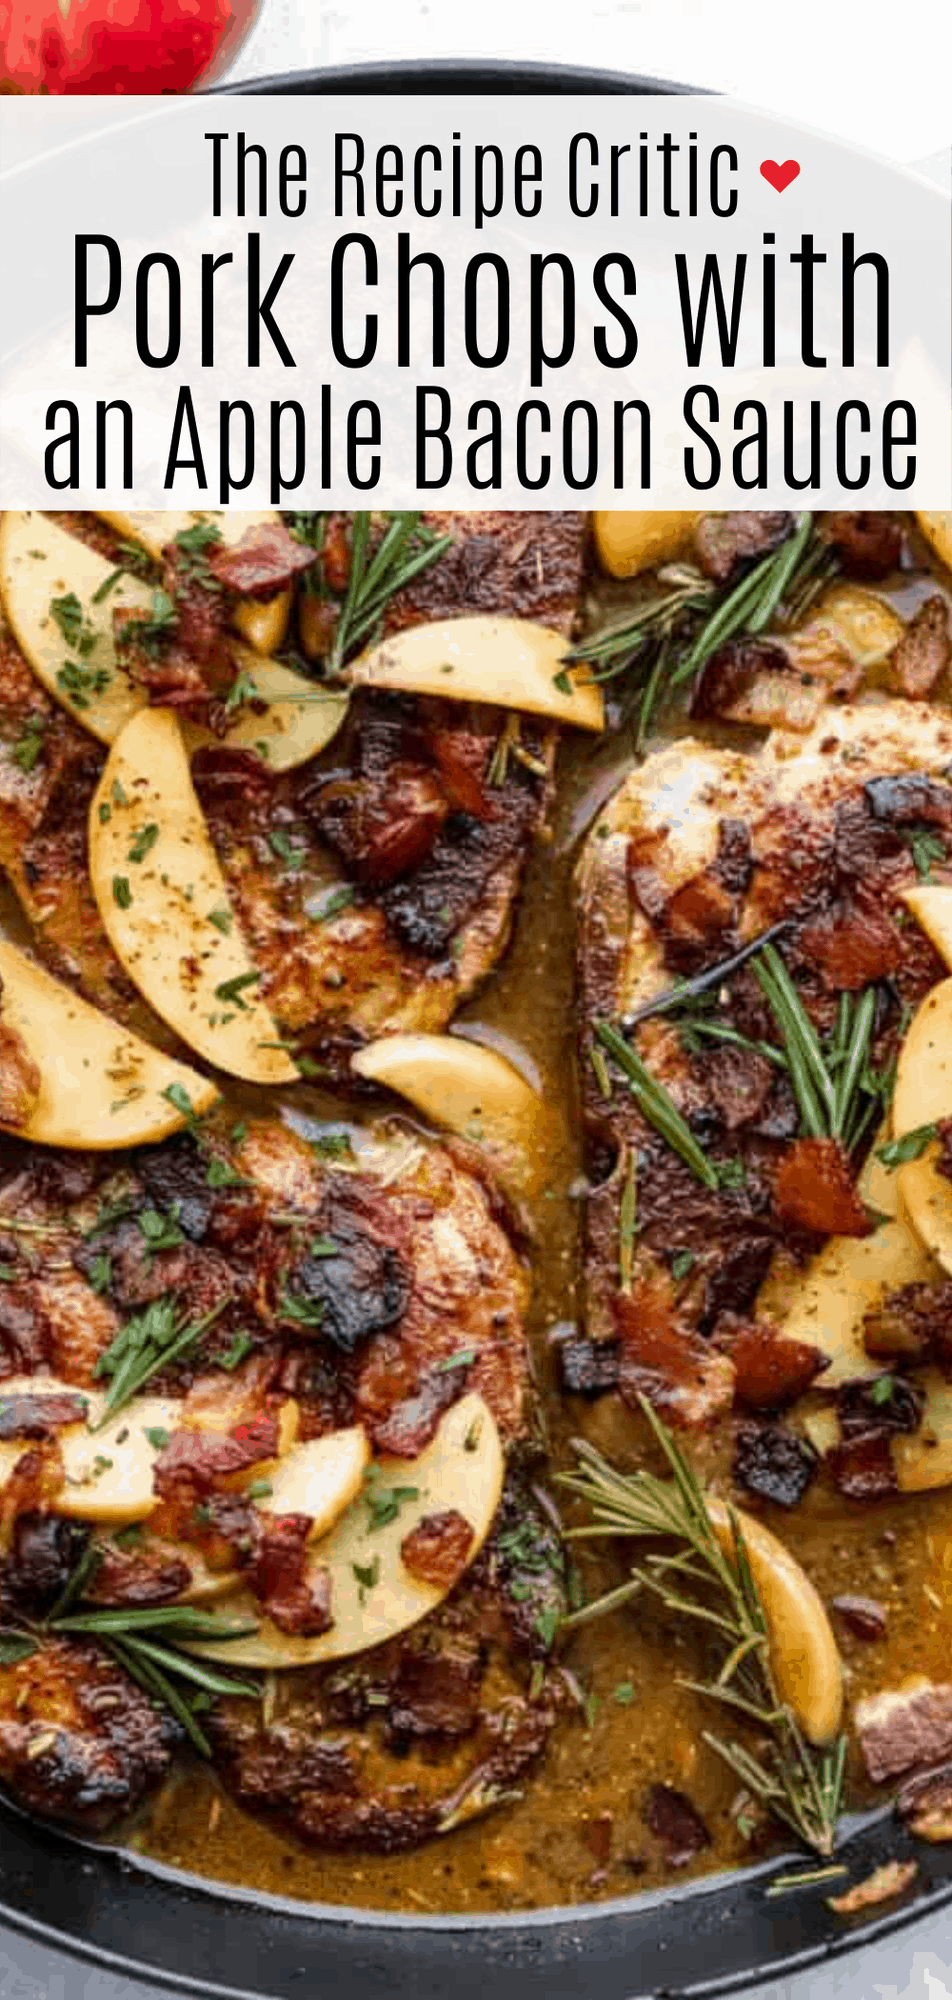 Pork Chops with Apples in an Apple Bacon Sauce - 17